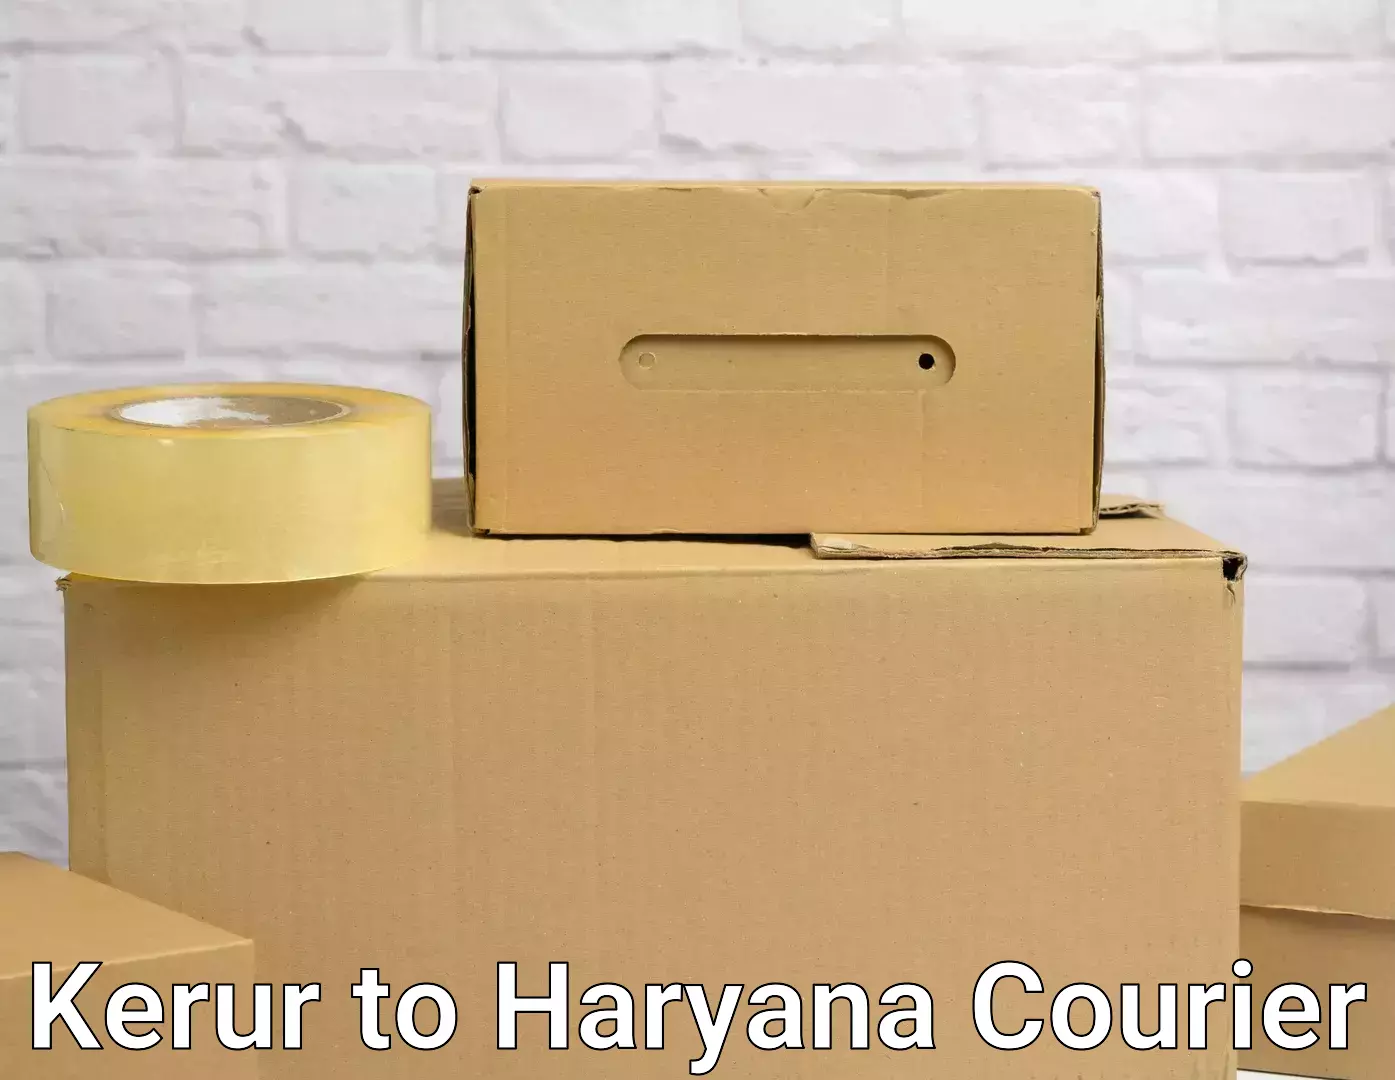 Quality moving and storage in Kerur to Gurgaon